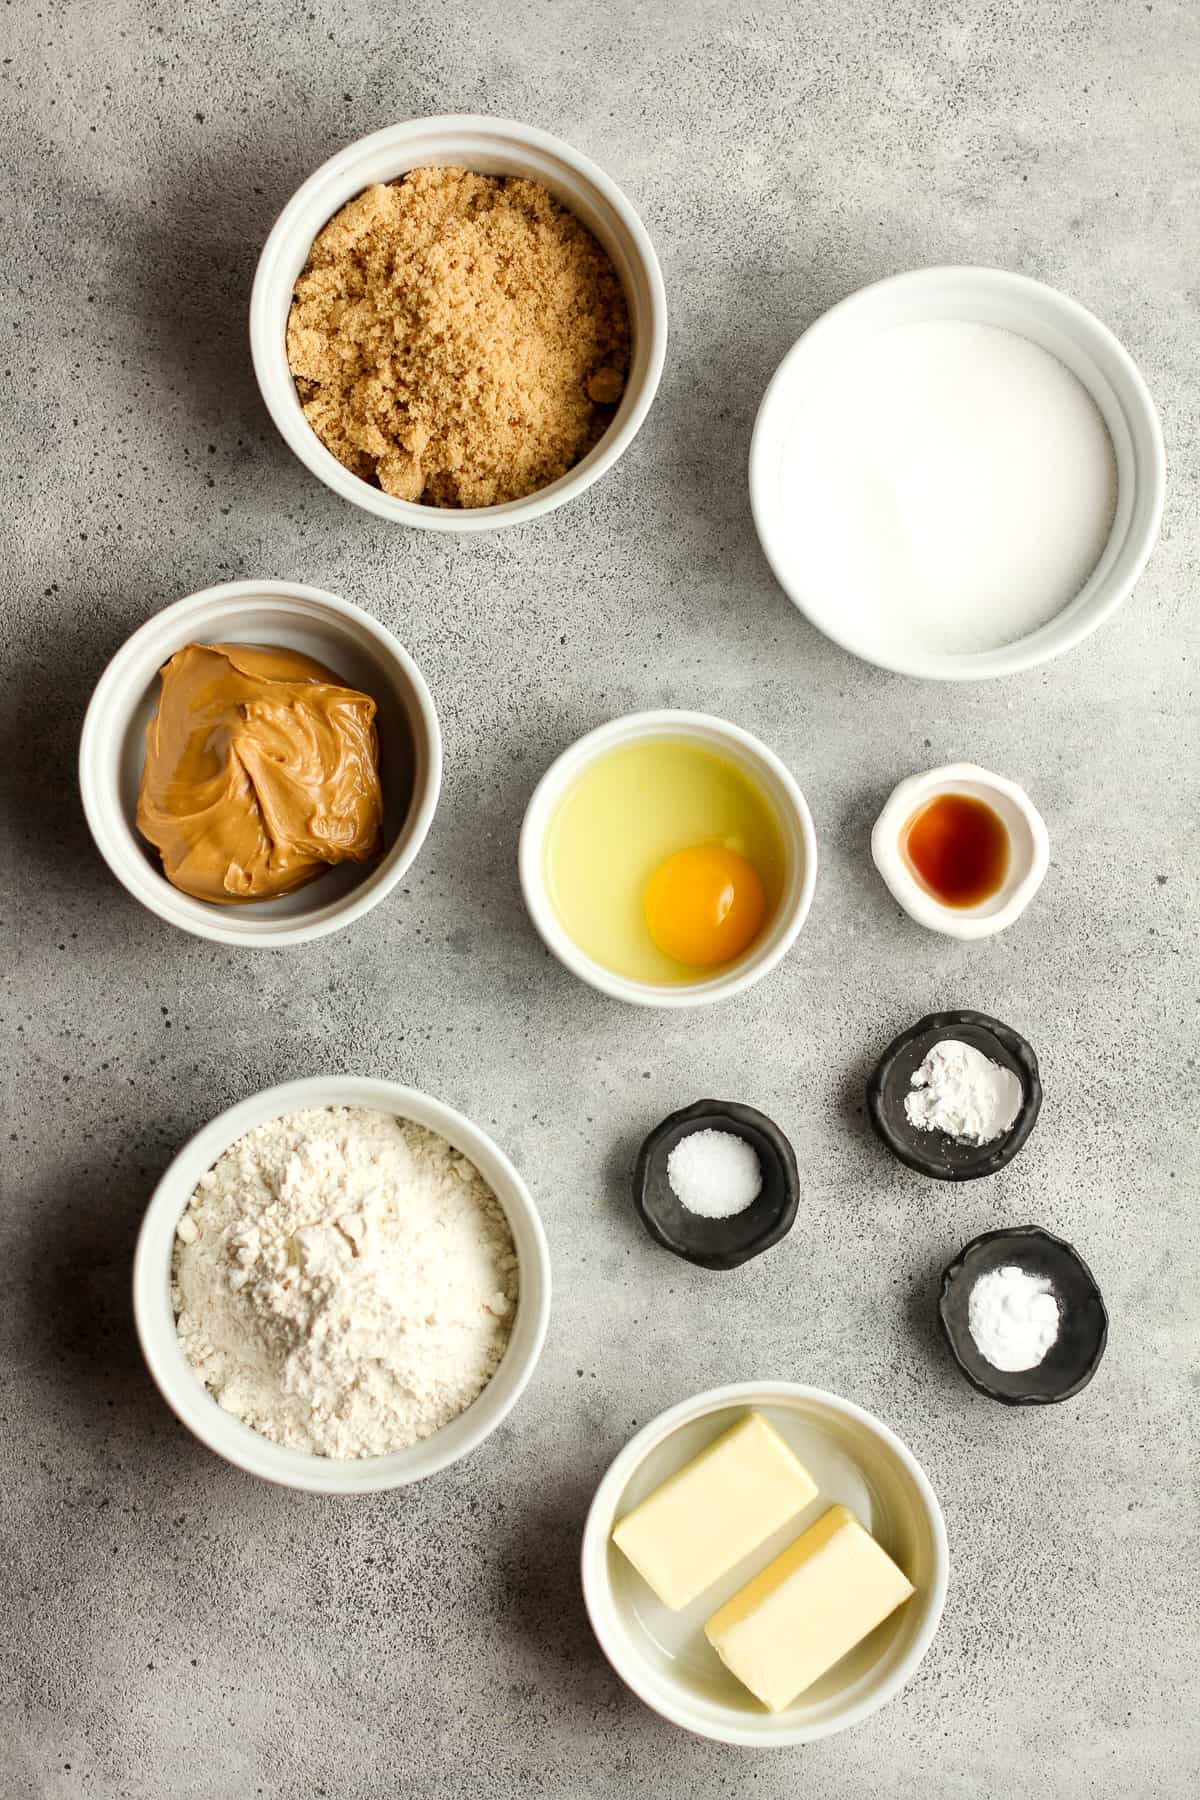 Ingredients for the peanut butter cookies.